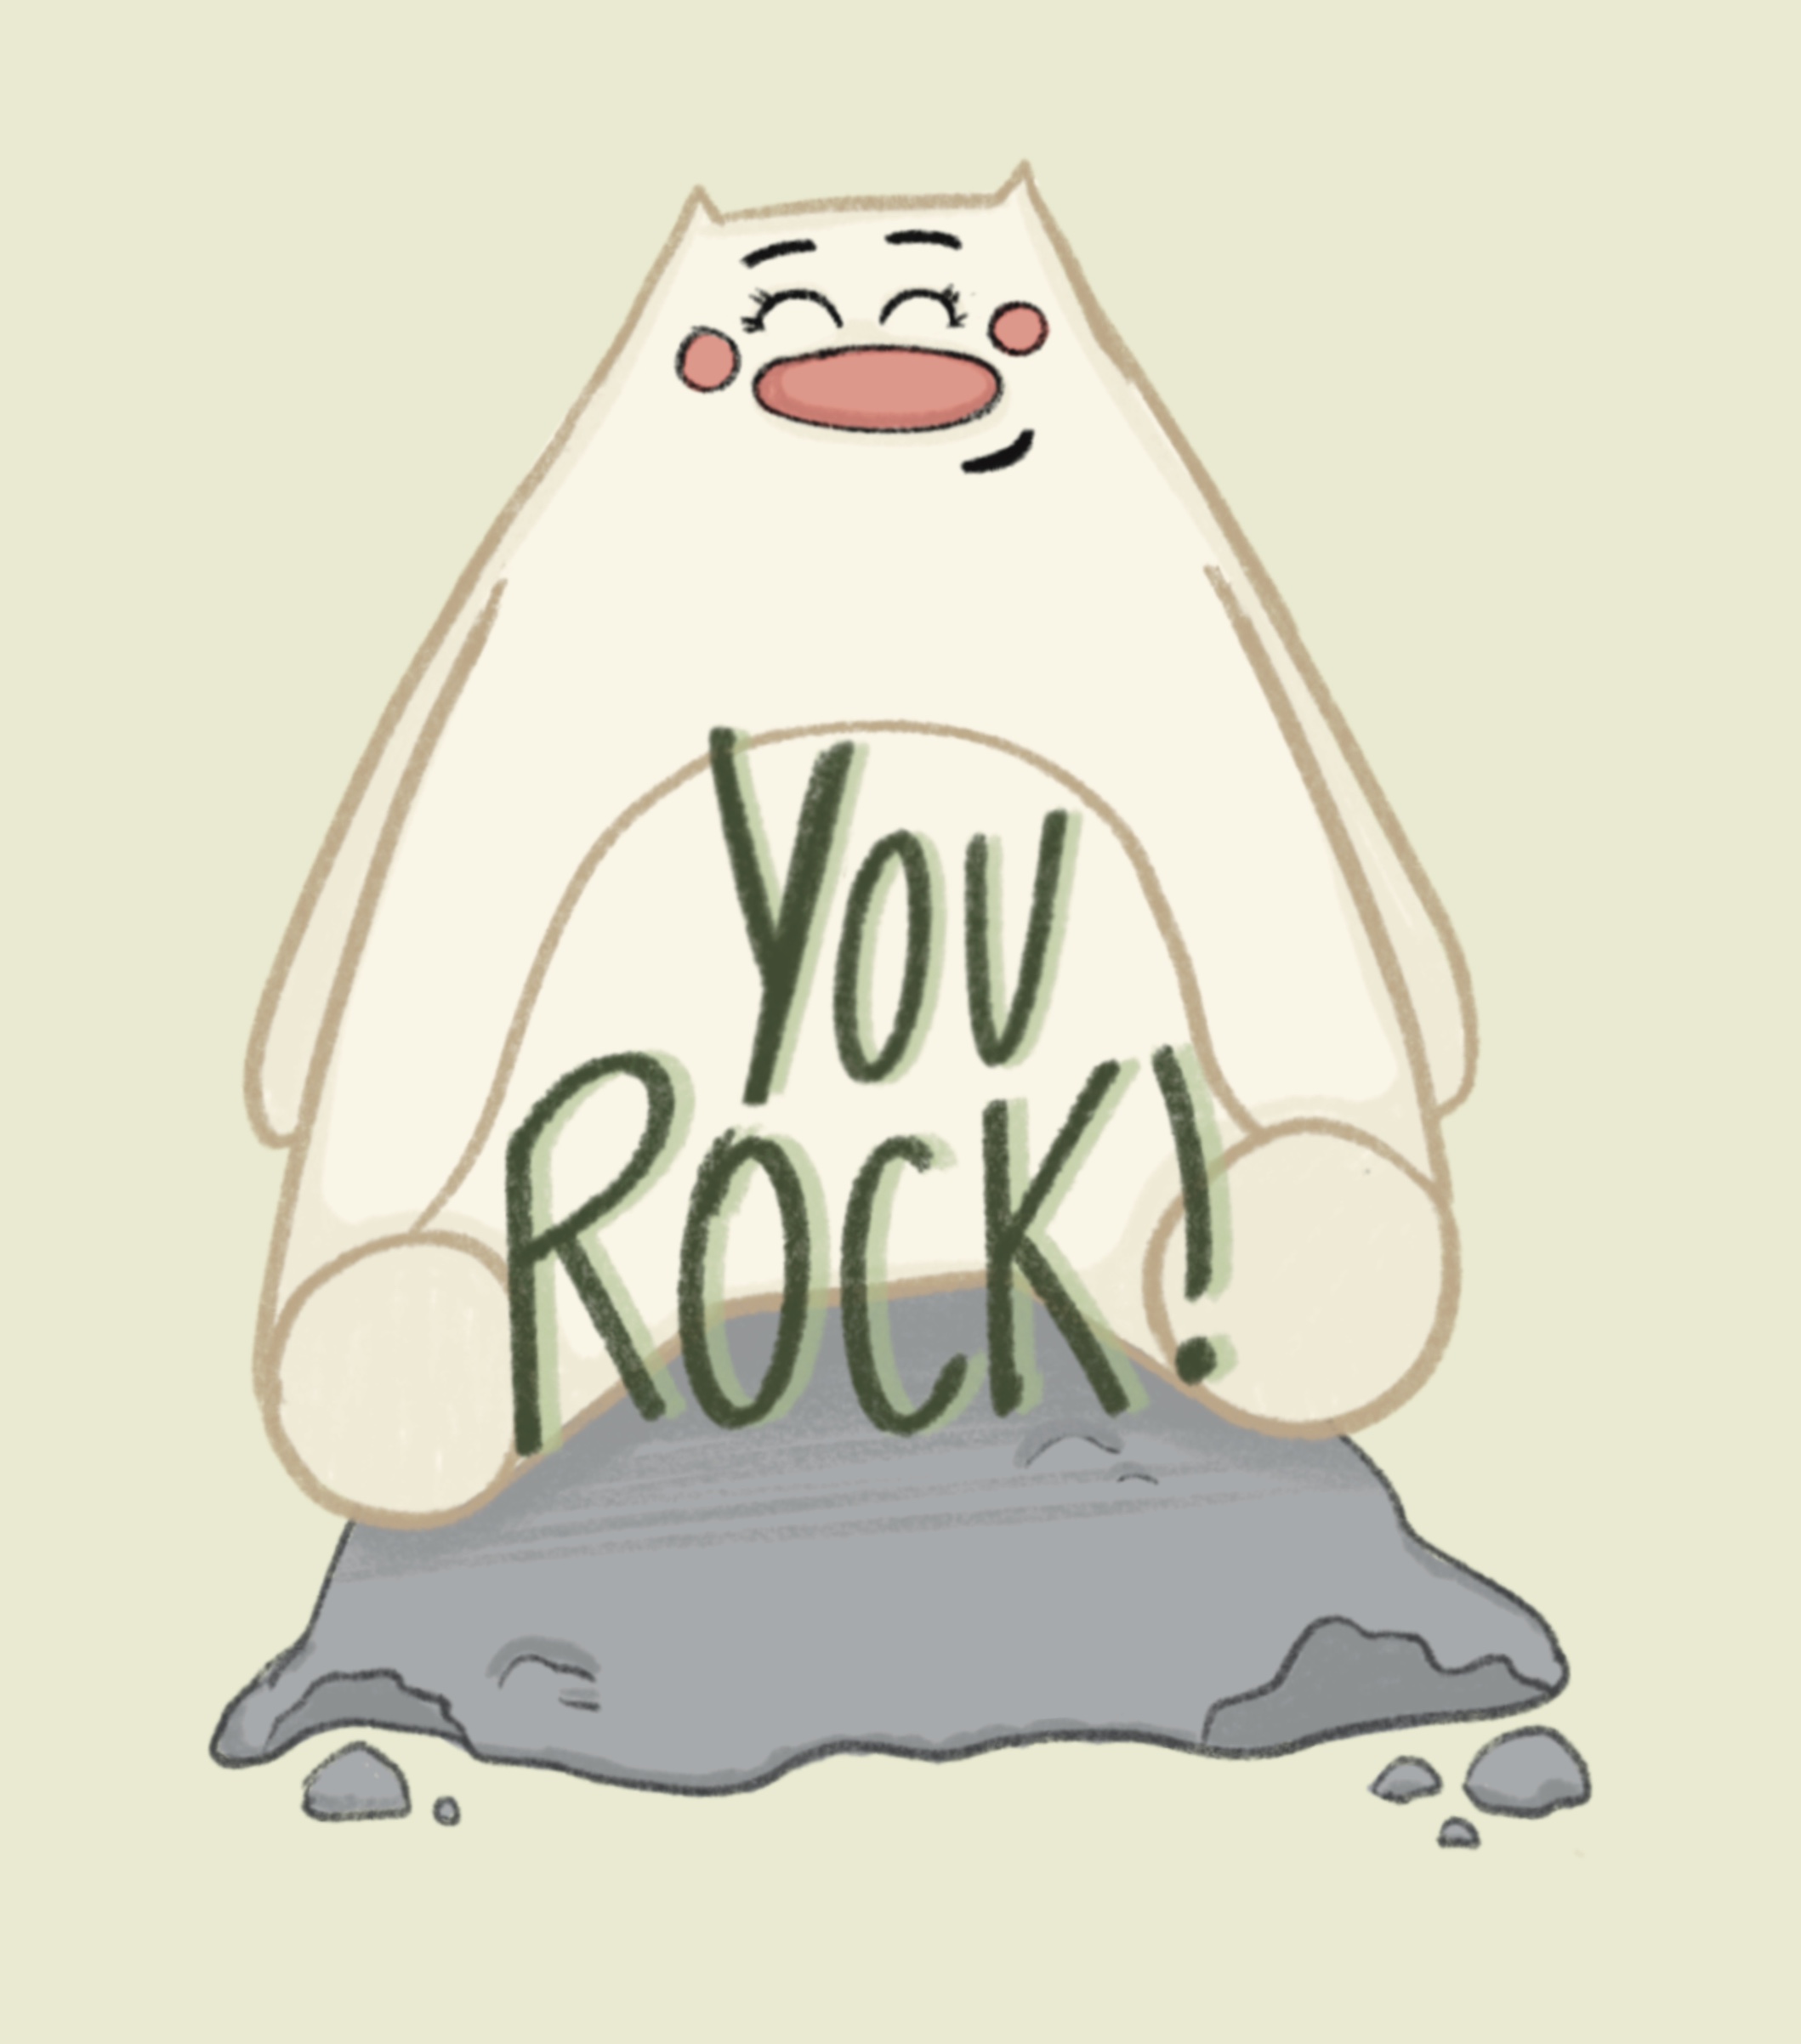 A spot illustration by Maddie Russell. Of Arbee character sitting on a rock, saying "You rock!".